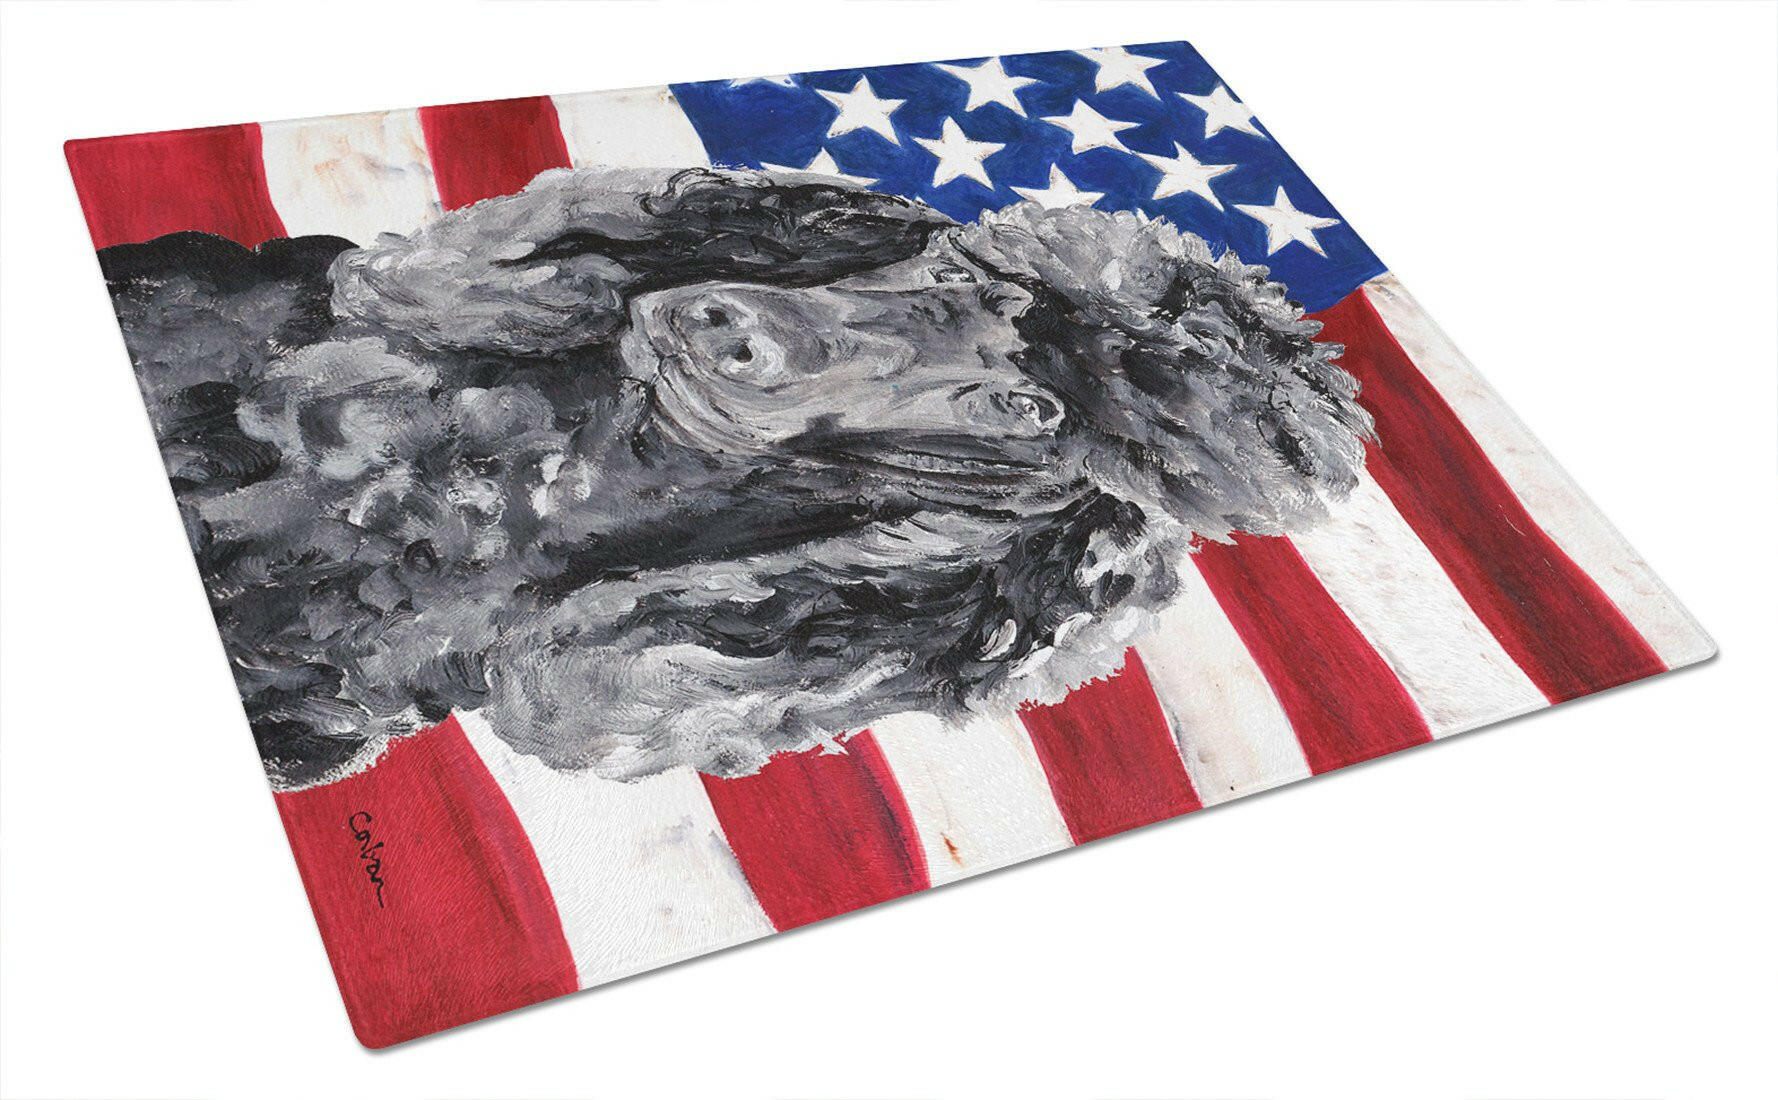 Black Standard Poodle with American Flag USA Glass Cutting Board Large Size SC9626LCB by Caroline's Treasures